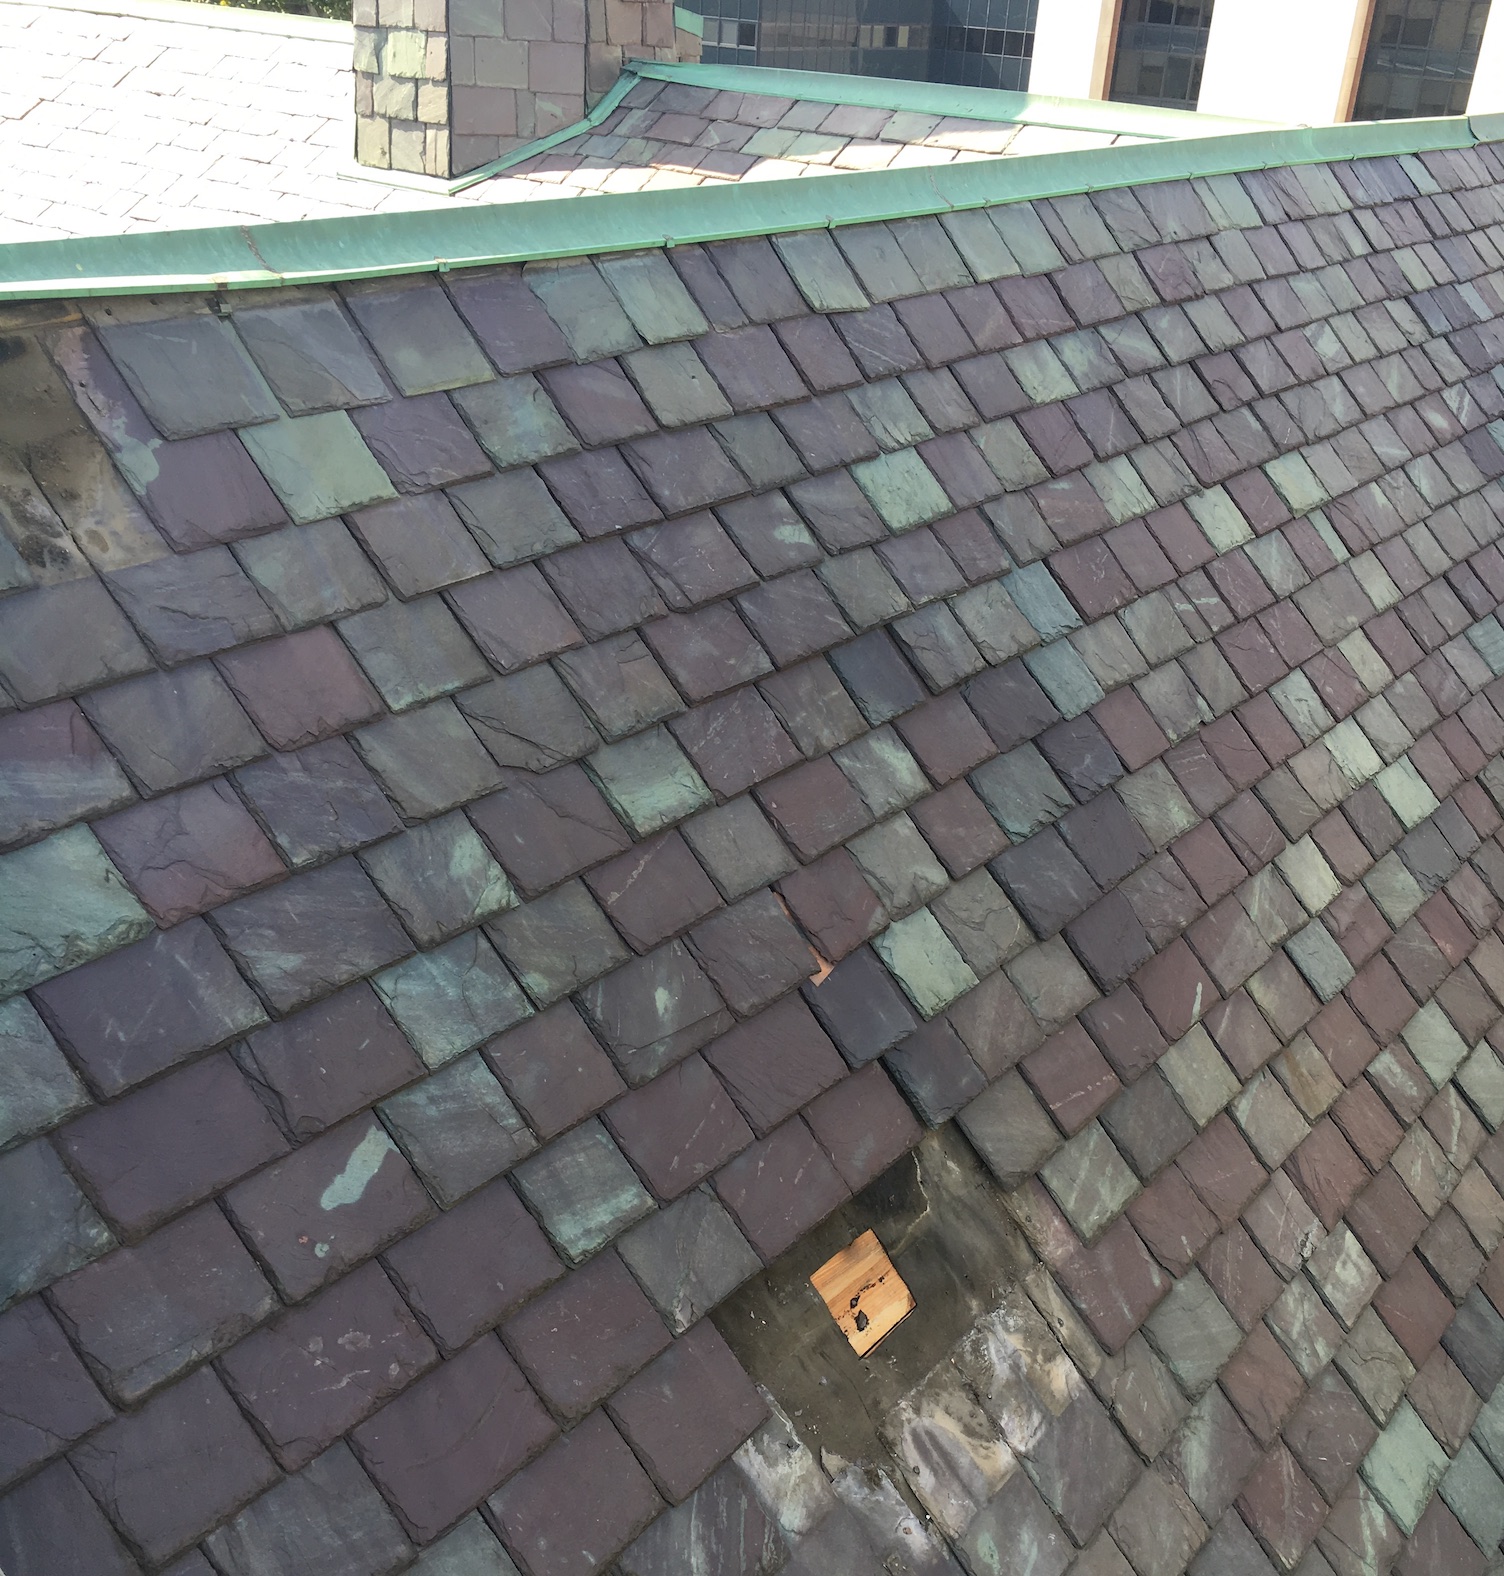 Detail of slate roof tiles, with one removed for exploration by renovation team.